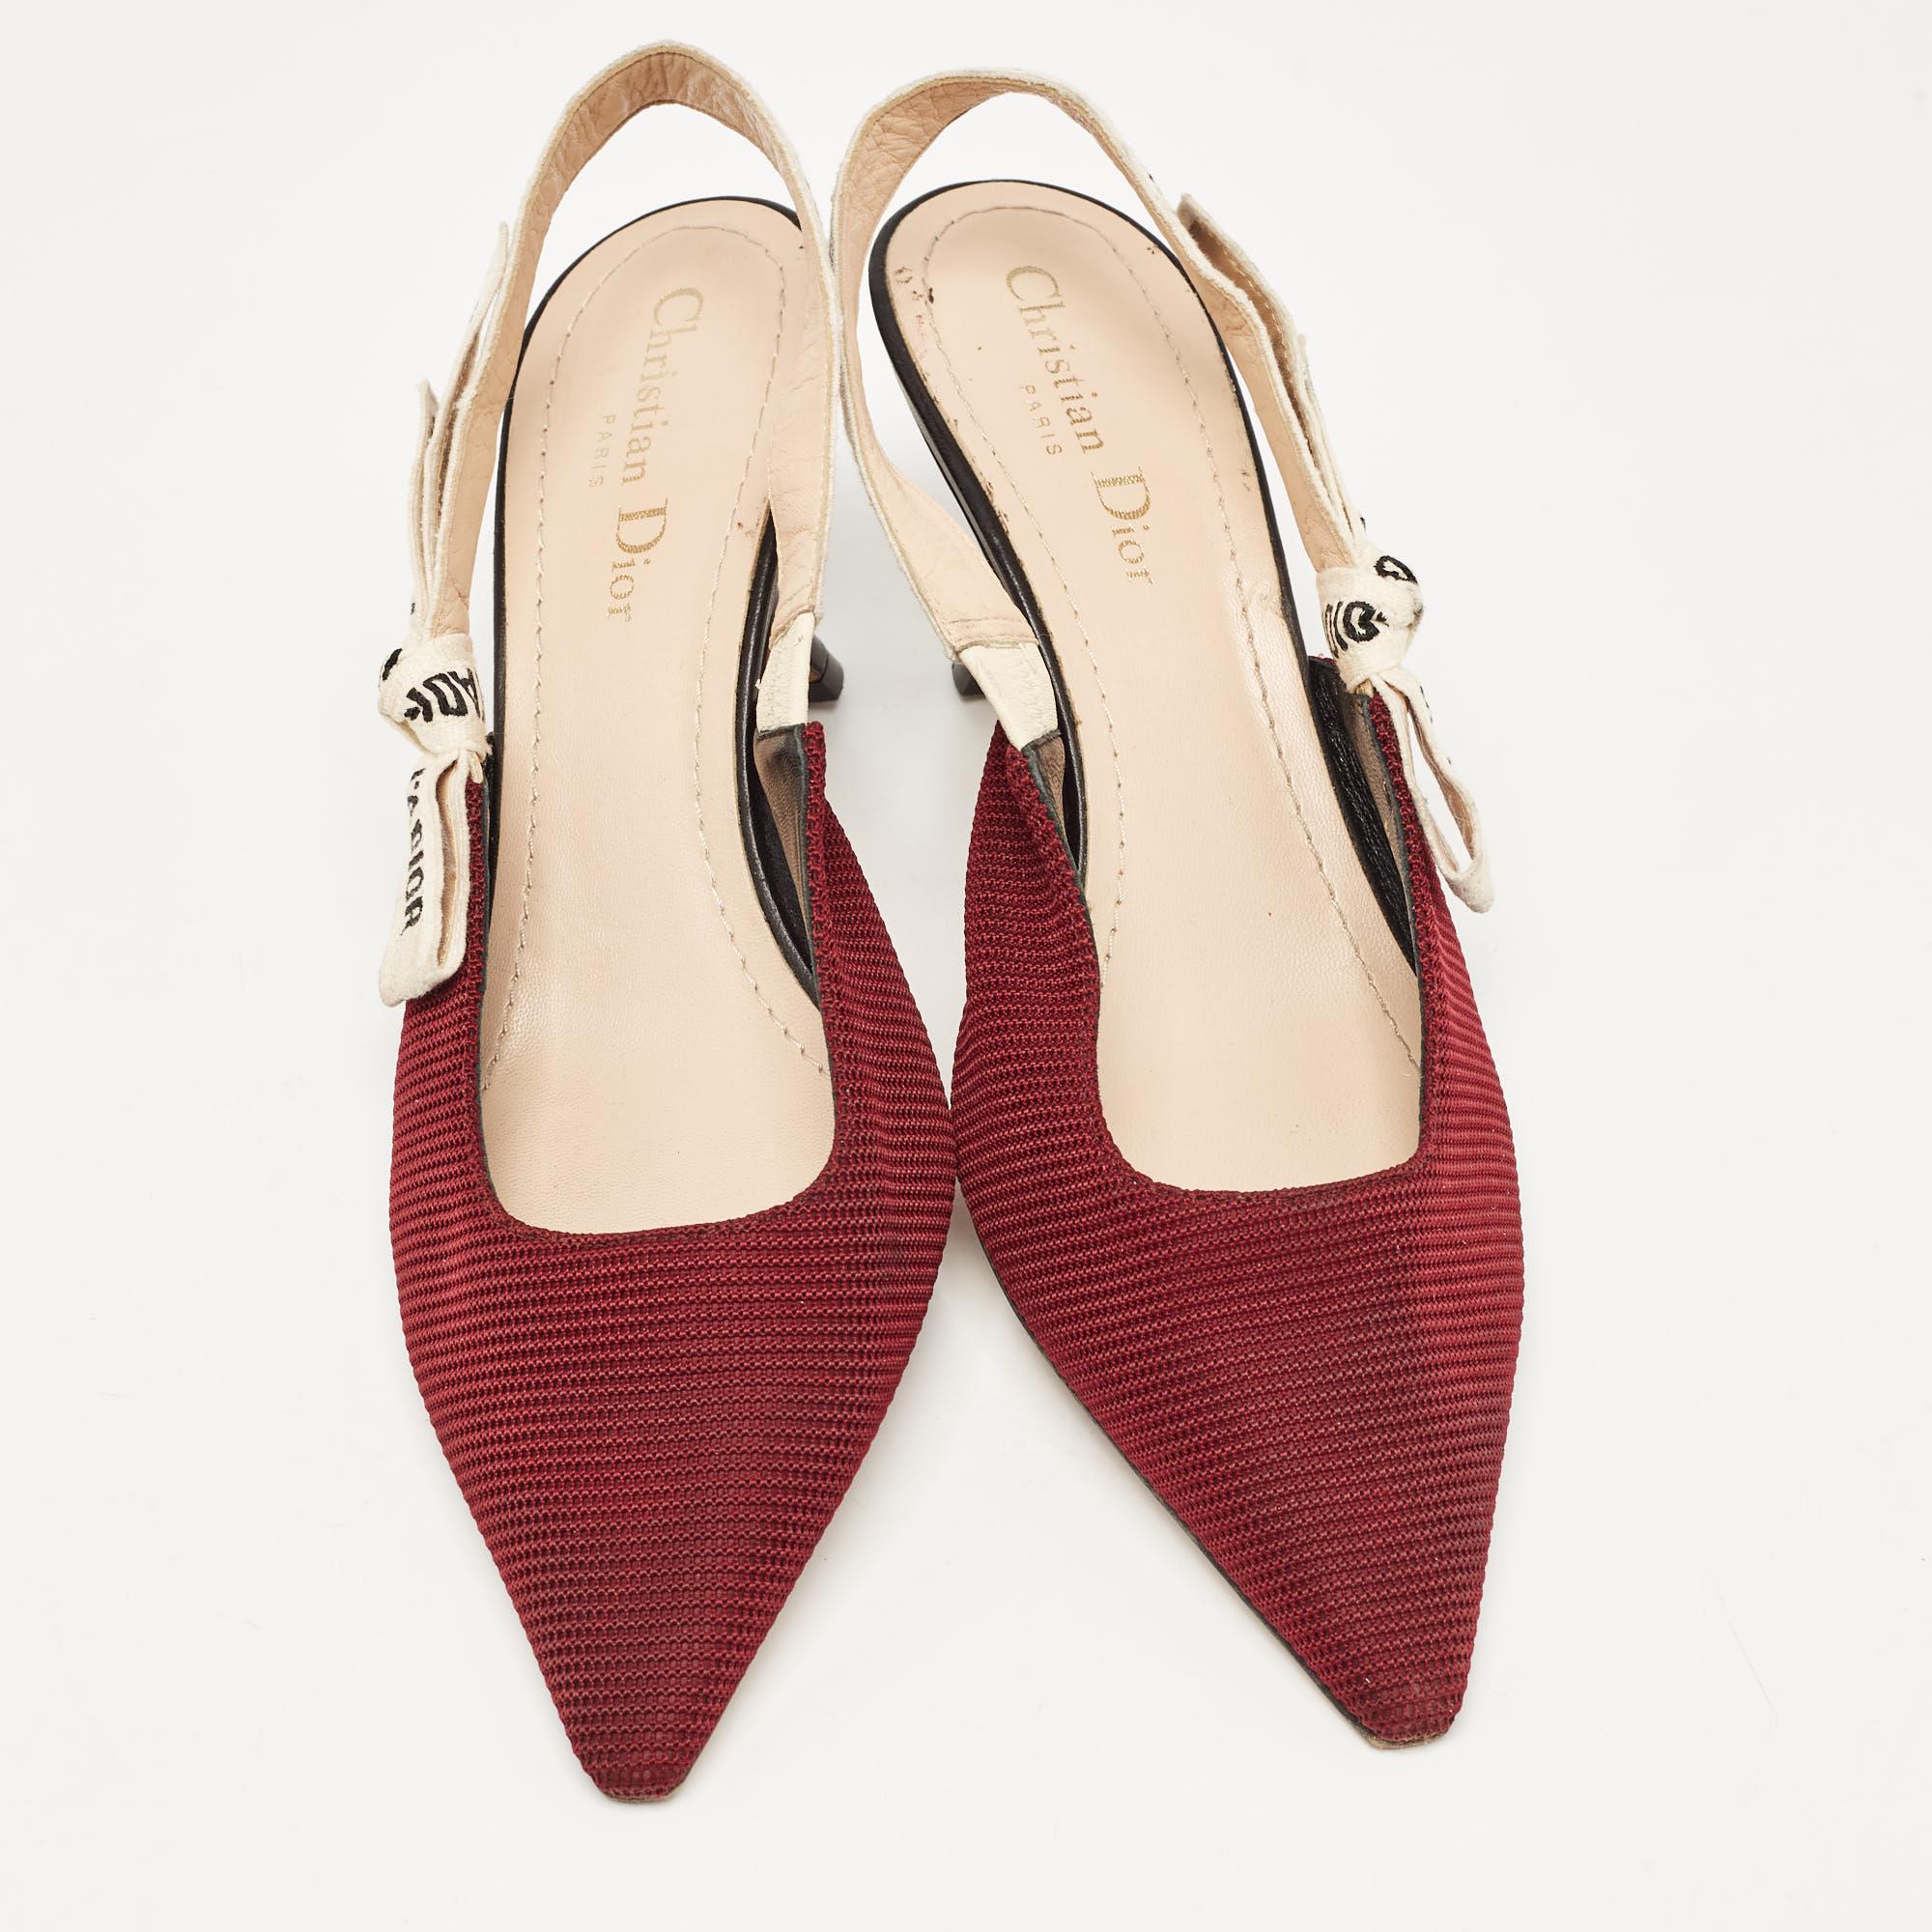 This pair of Dior pumps celebrates femininity like all other designs of the brand. Made from mesh, the creation is highlighted with a 'J'Adior' detailed slingback closure, and the sharp silhouette is balanced on 7cm heels.

